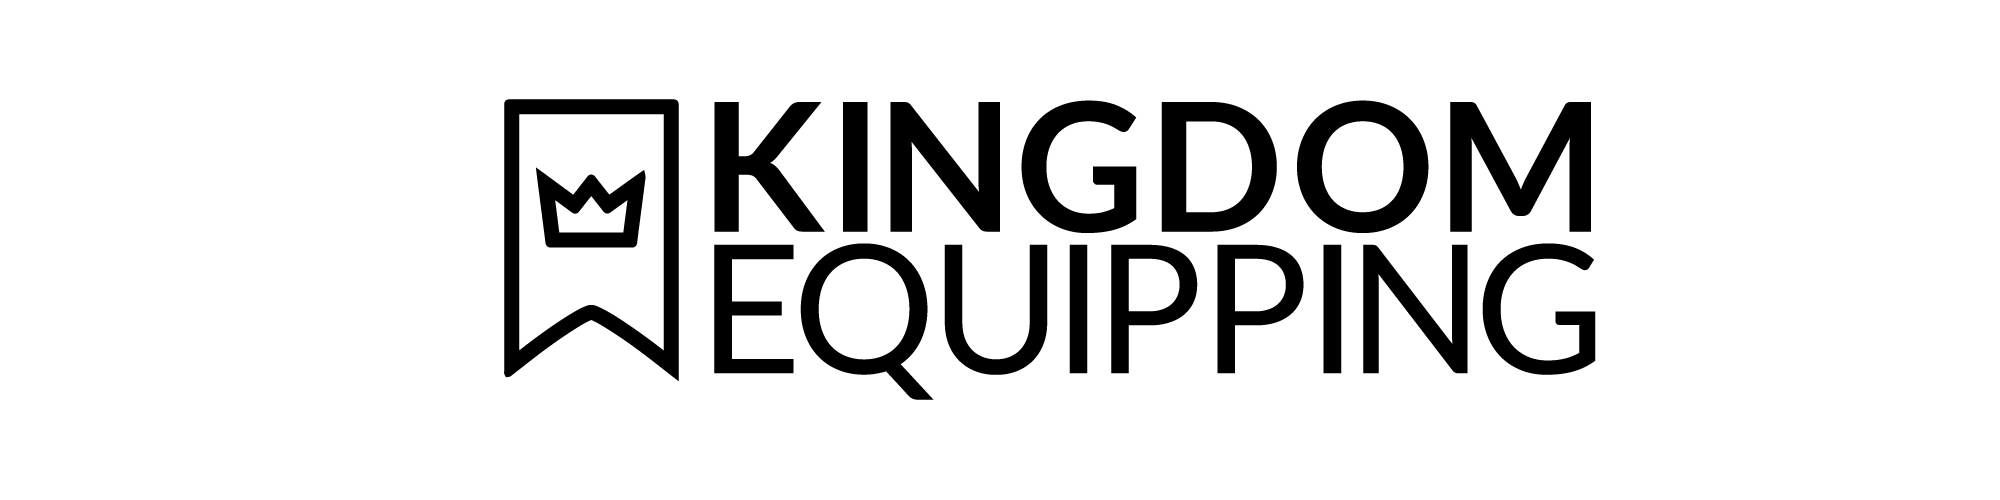 Kingdom Equipping | A ministry of The Vineyard Church of Central Illinois